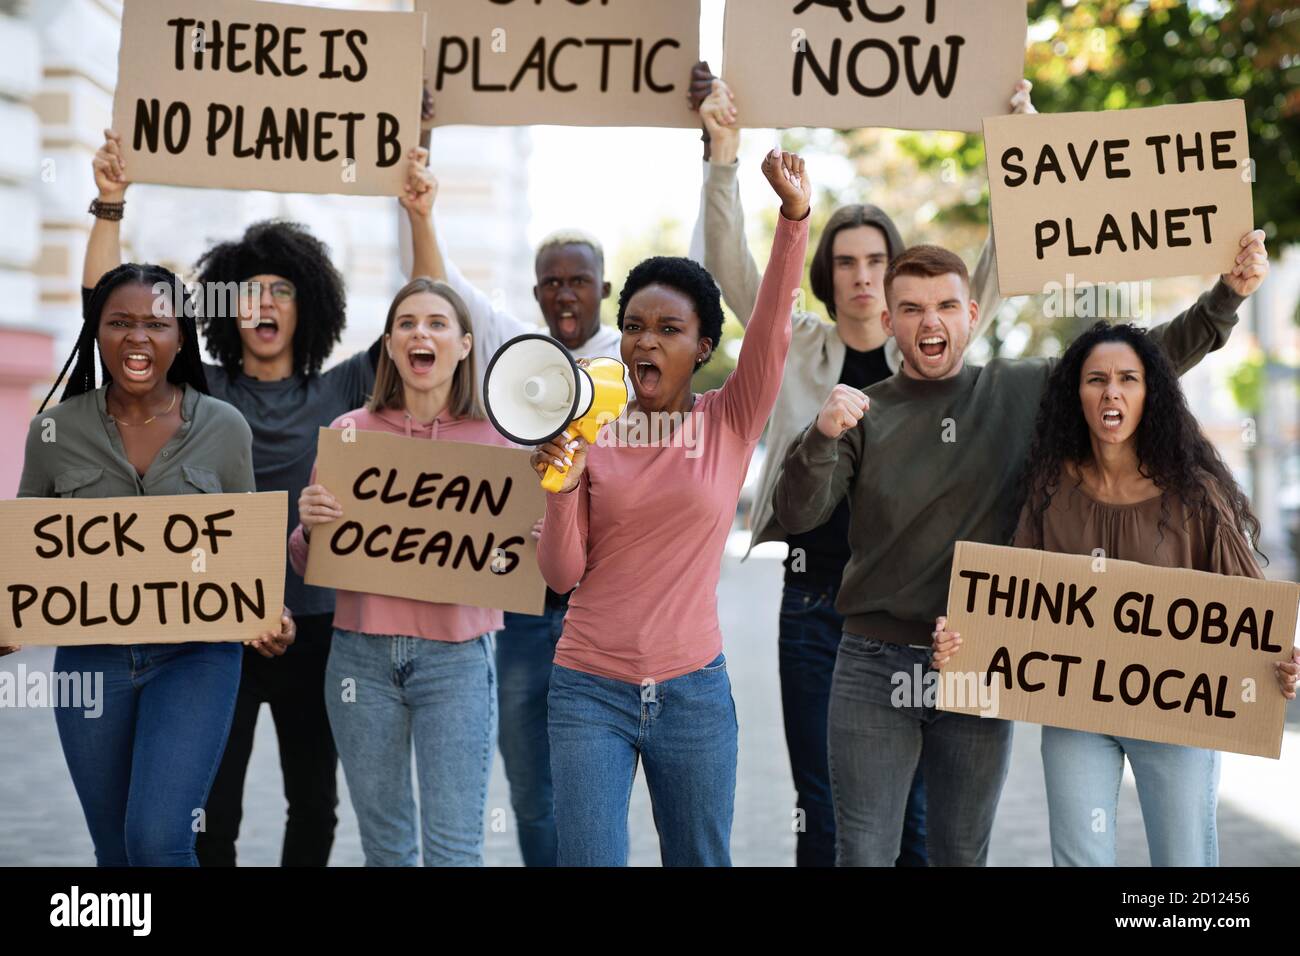 International group of demonstrators fighting for healthy environment Stock Photo